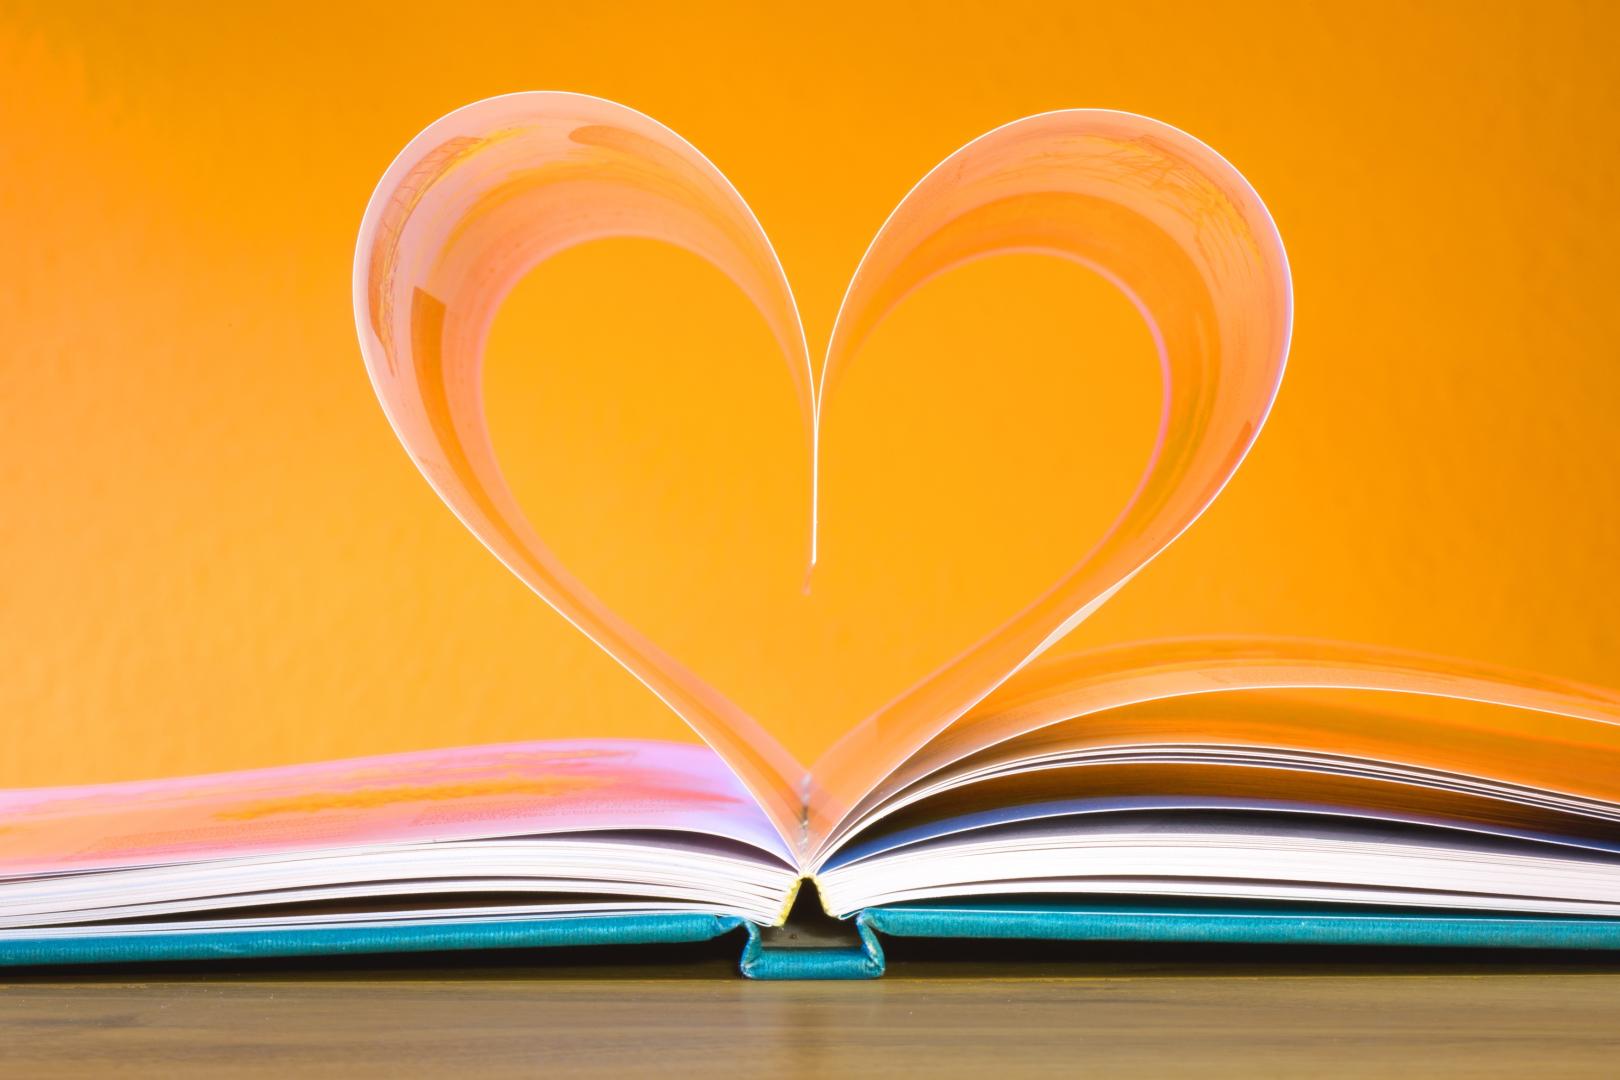 Open book with heart shaped pages